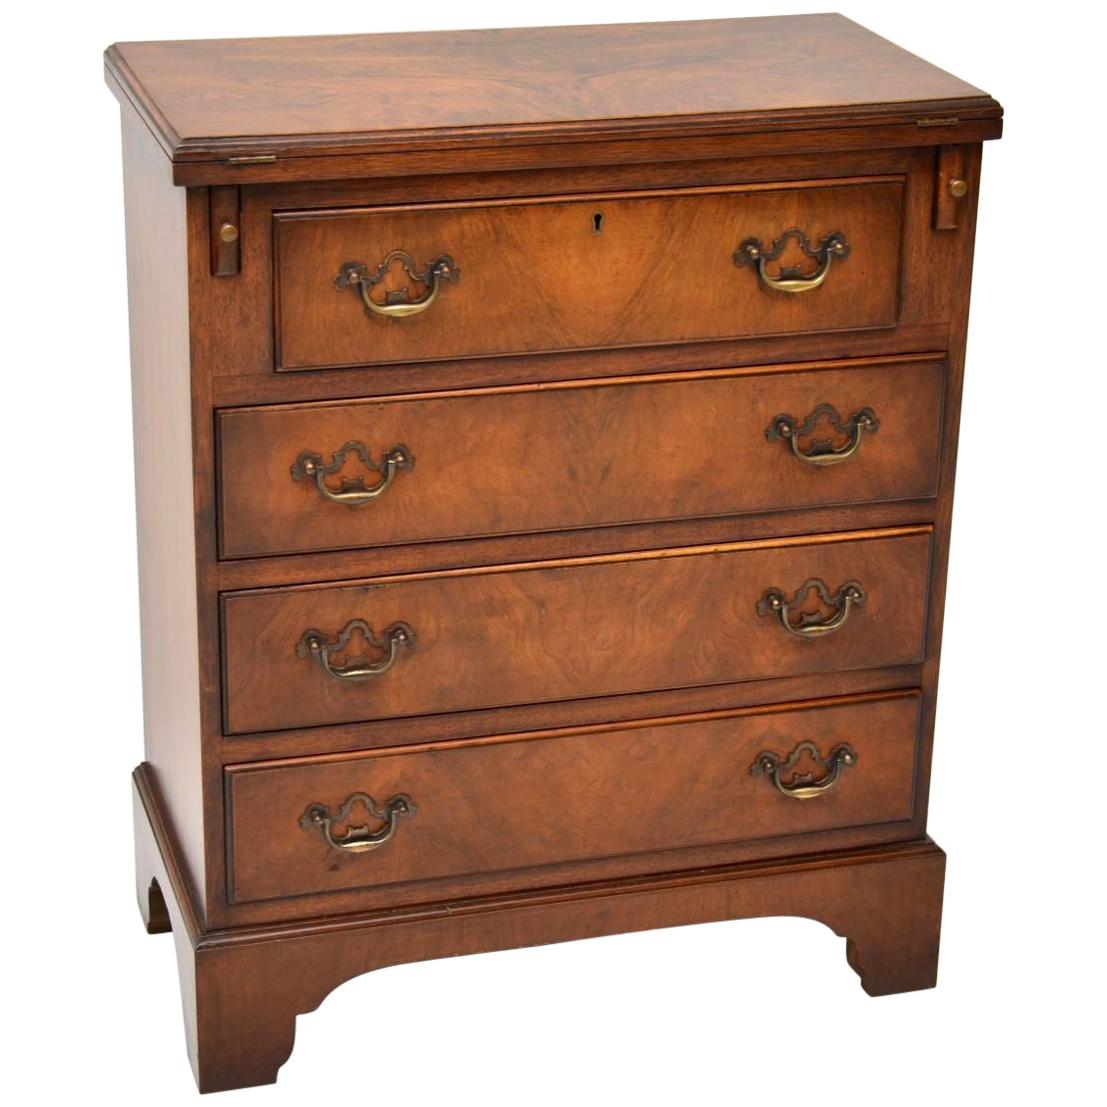 Antique Walnut Bachelors Chest of Drawers